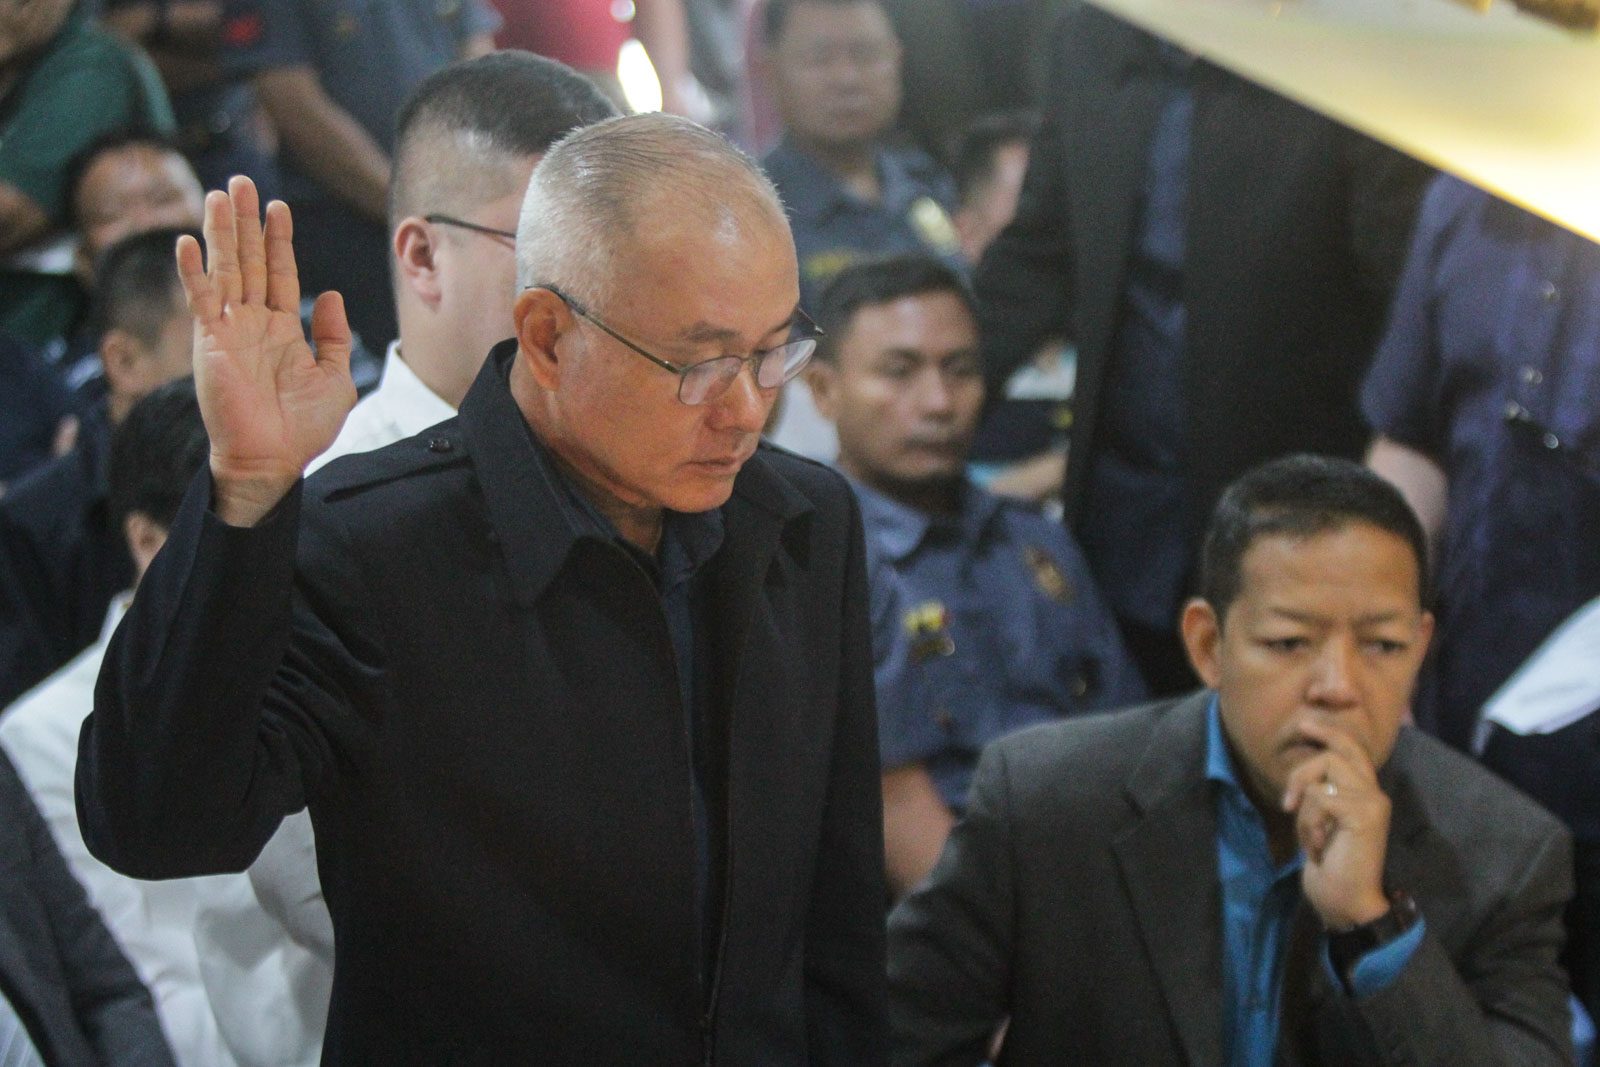 Albayalde welcomes graft charges: ‘The truth will bear me out in the end’